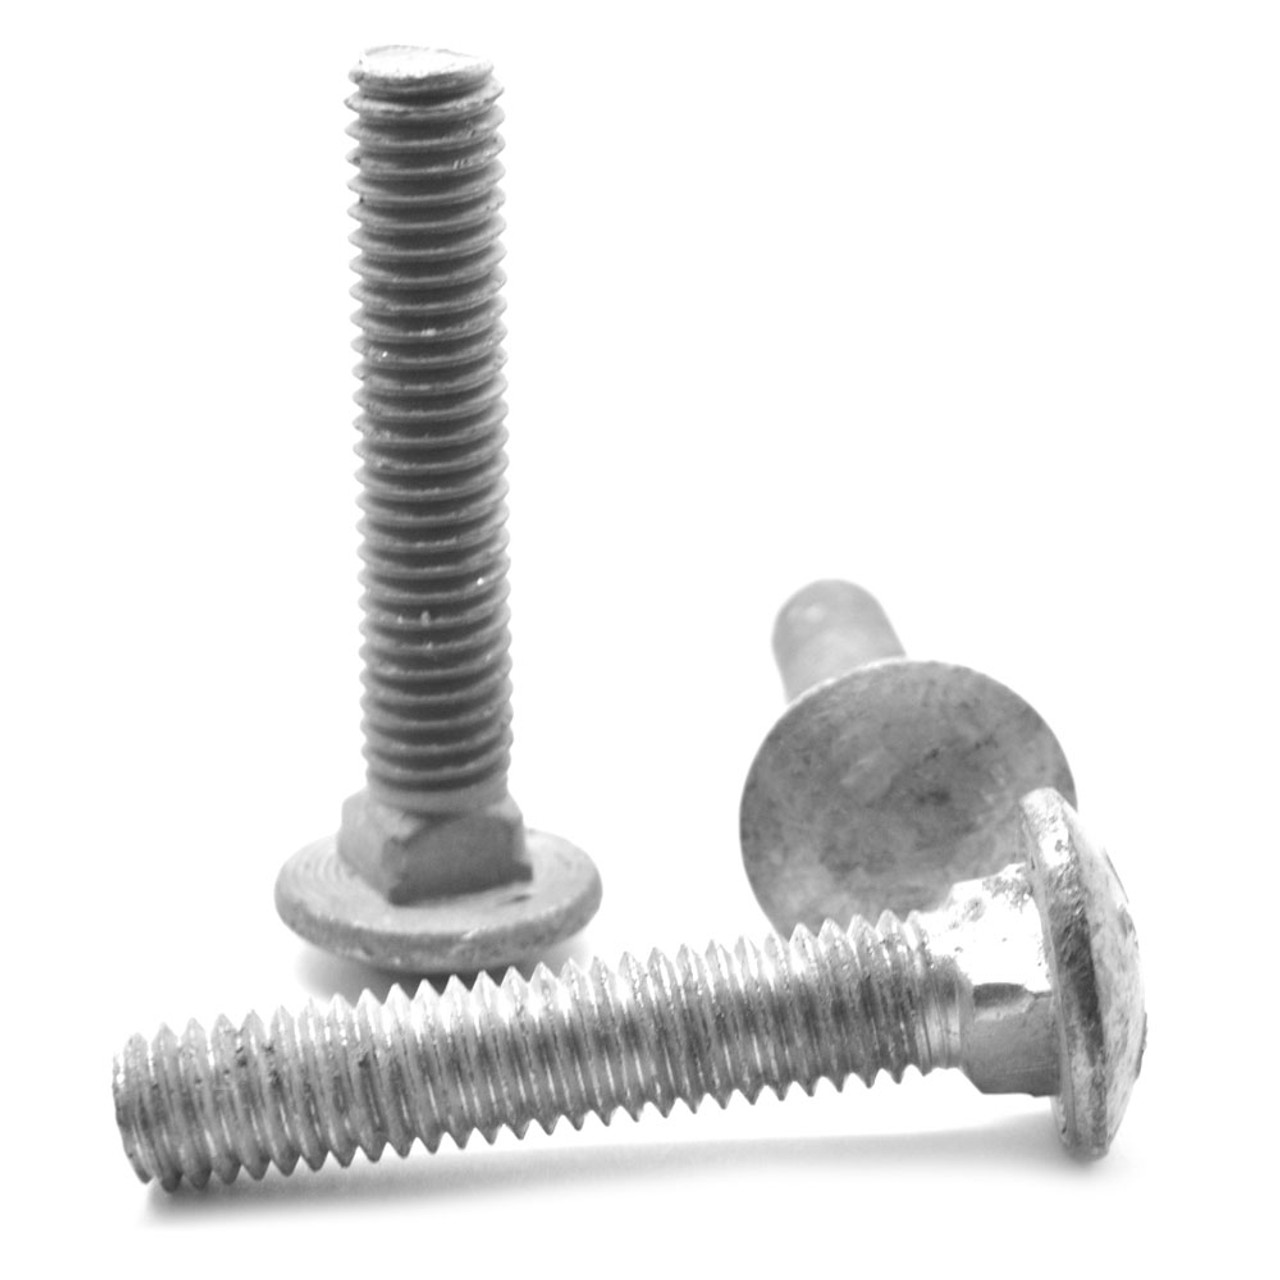 1/2"-13 x 3 1/2" (FT) Coarse Thread A307 Grade A Carriage Bolt Low Carbon Steel Hot Dip Galvanized